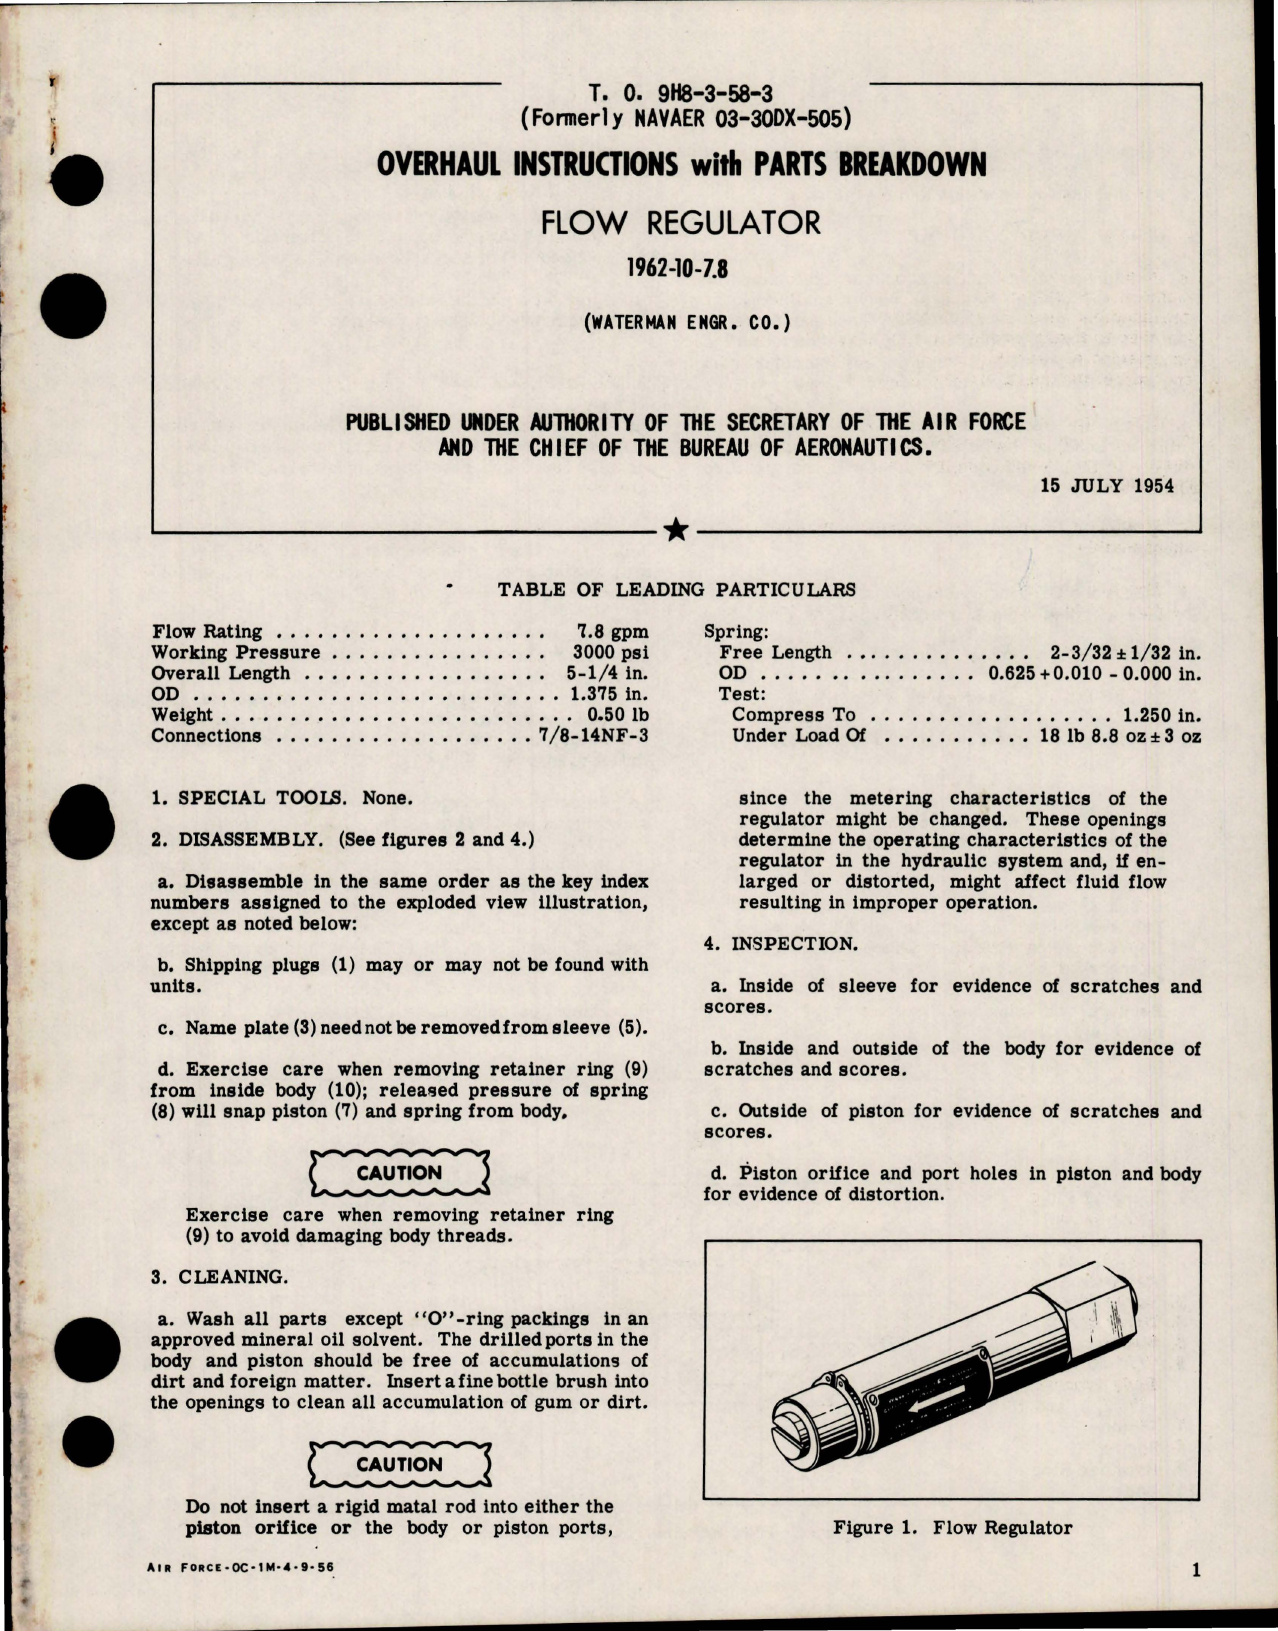 Sample page 1 from AirCorps Library document: Overhaul Instructions with Parts for Flow Regulator - 1962-10-7.8 